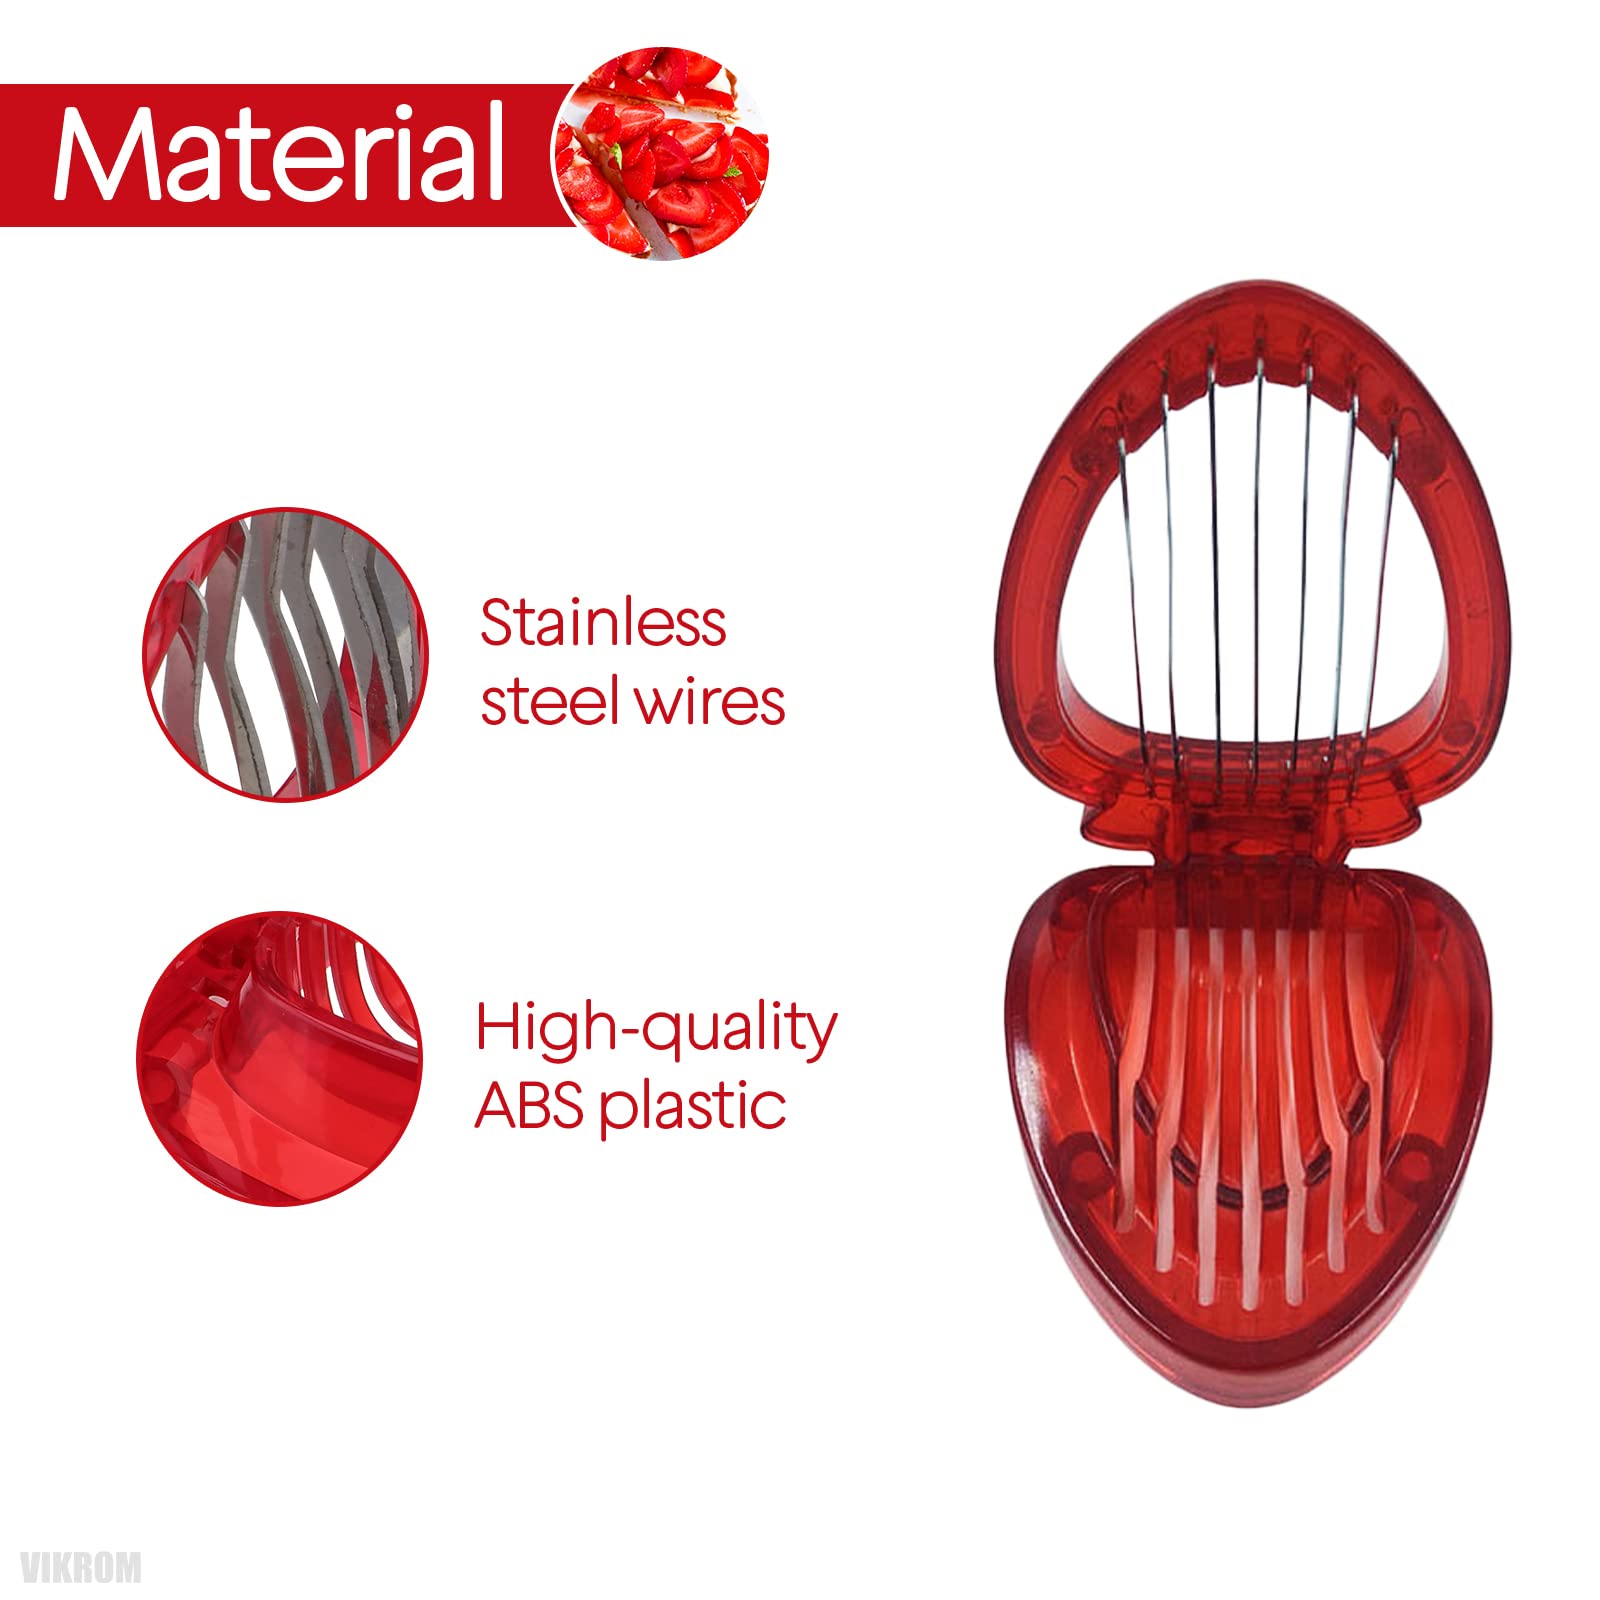 2 Pack Of Silicone Mini Cake Baking Molds & Strawberry Slicer Kitchen Gadget